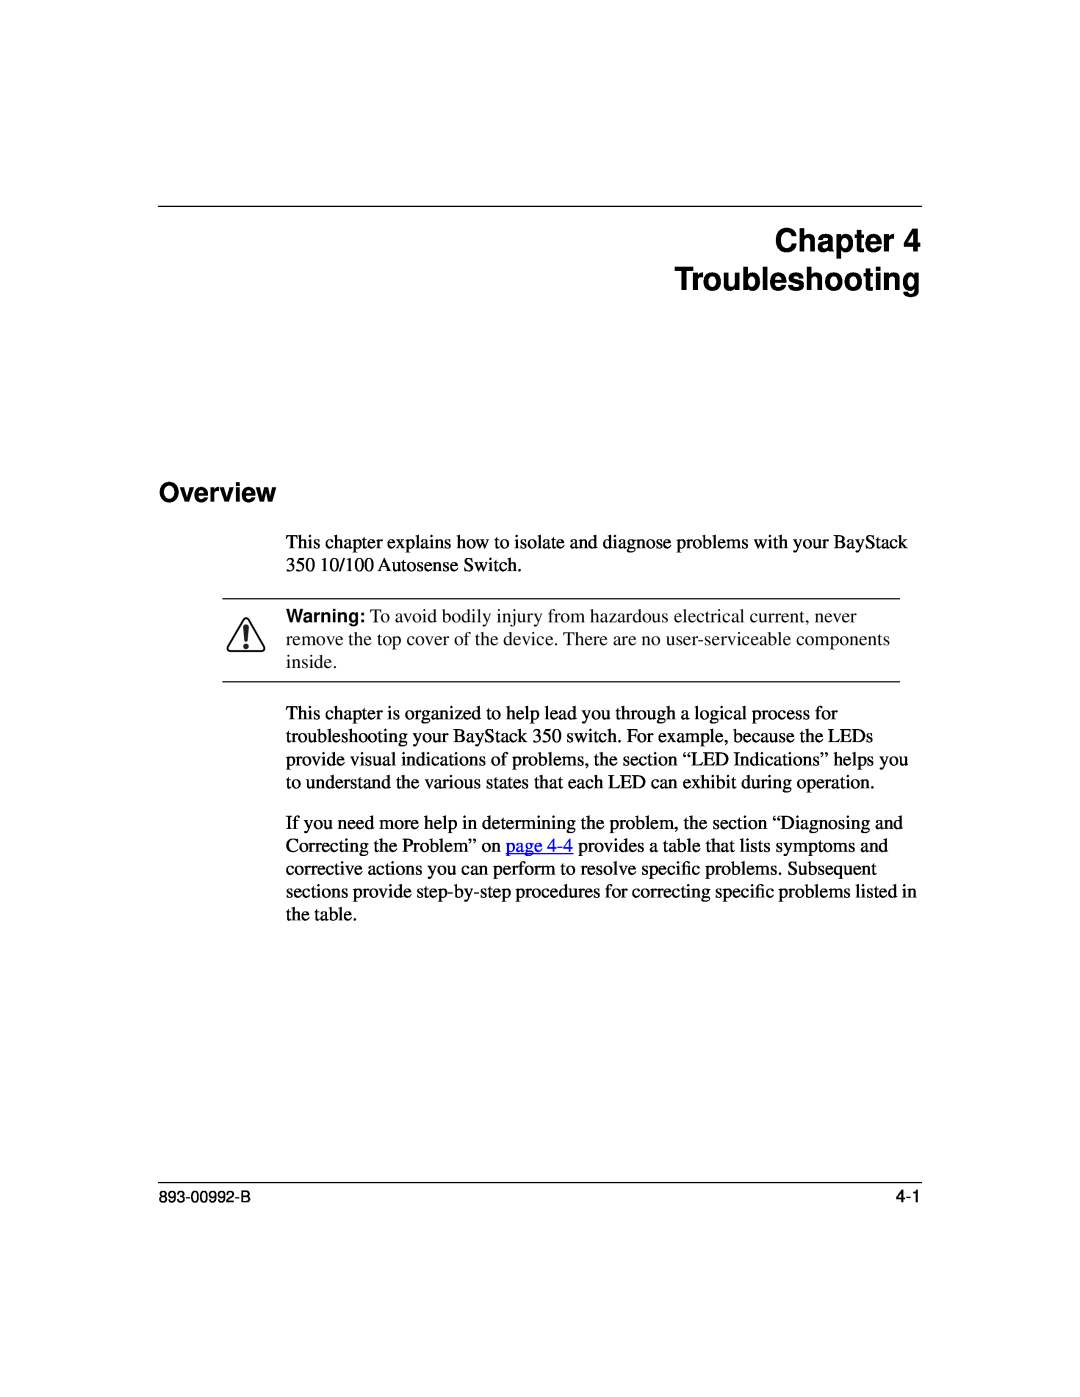 Bay Technical Associates 350 manual Chapter Troubleshooting, Overview 